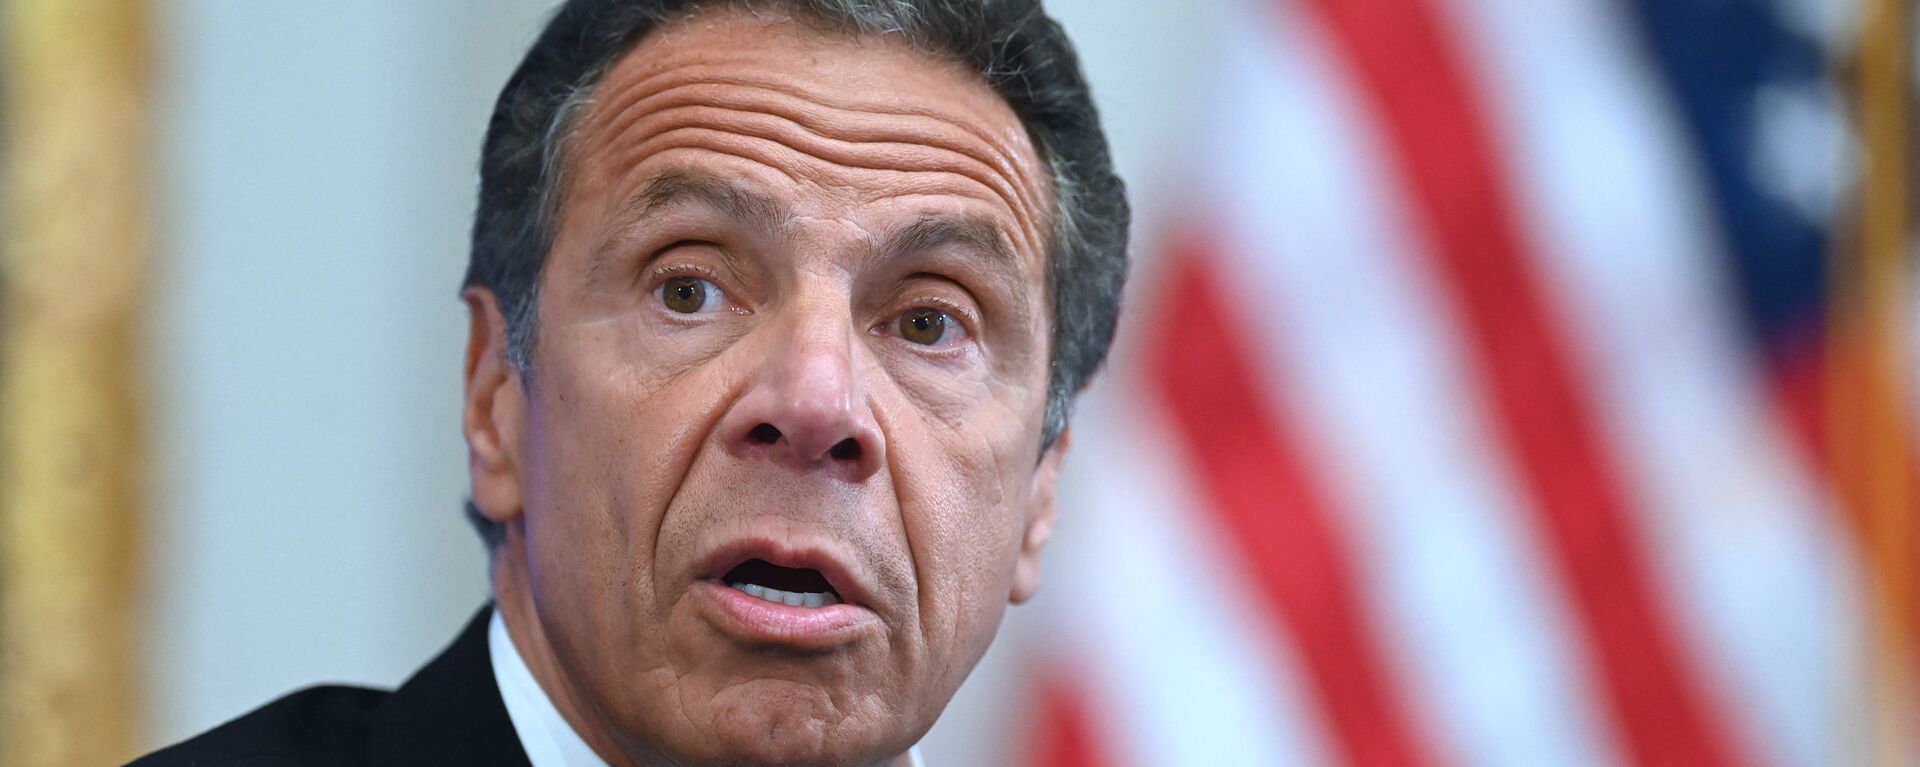  In this file photo Governor of New York Andrew Cuomo speaks during a press conference at the New York Stock Exchange (NYSE) on May 26, 2020 at Wall Street in New York City. - Sputnik International, 1920, 31.10.2021